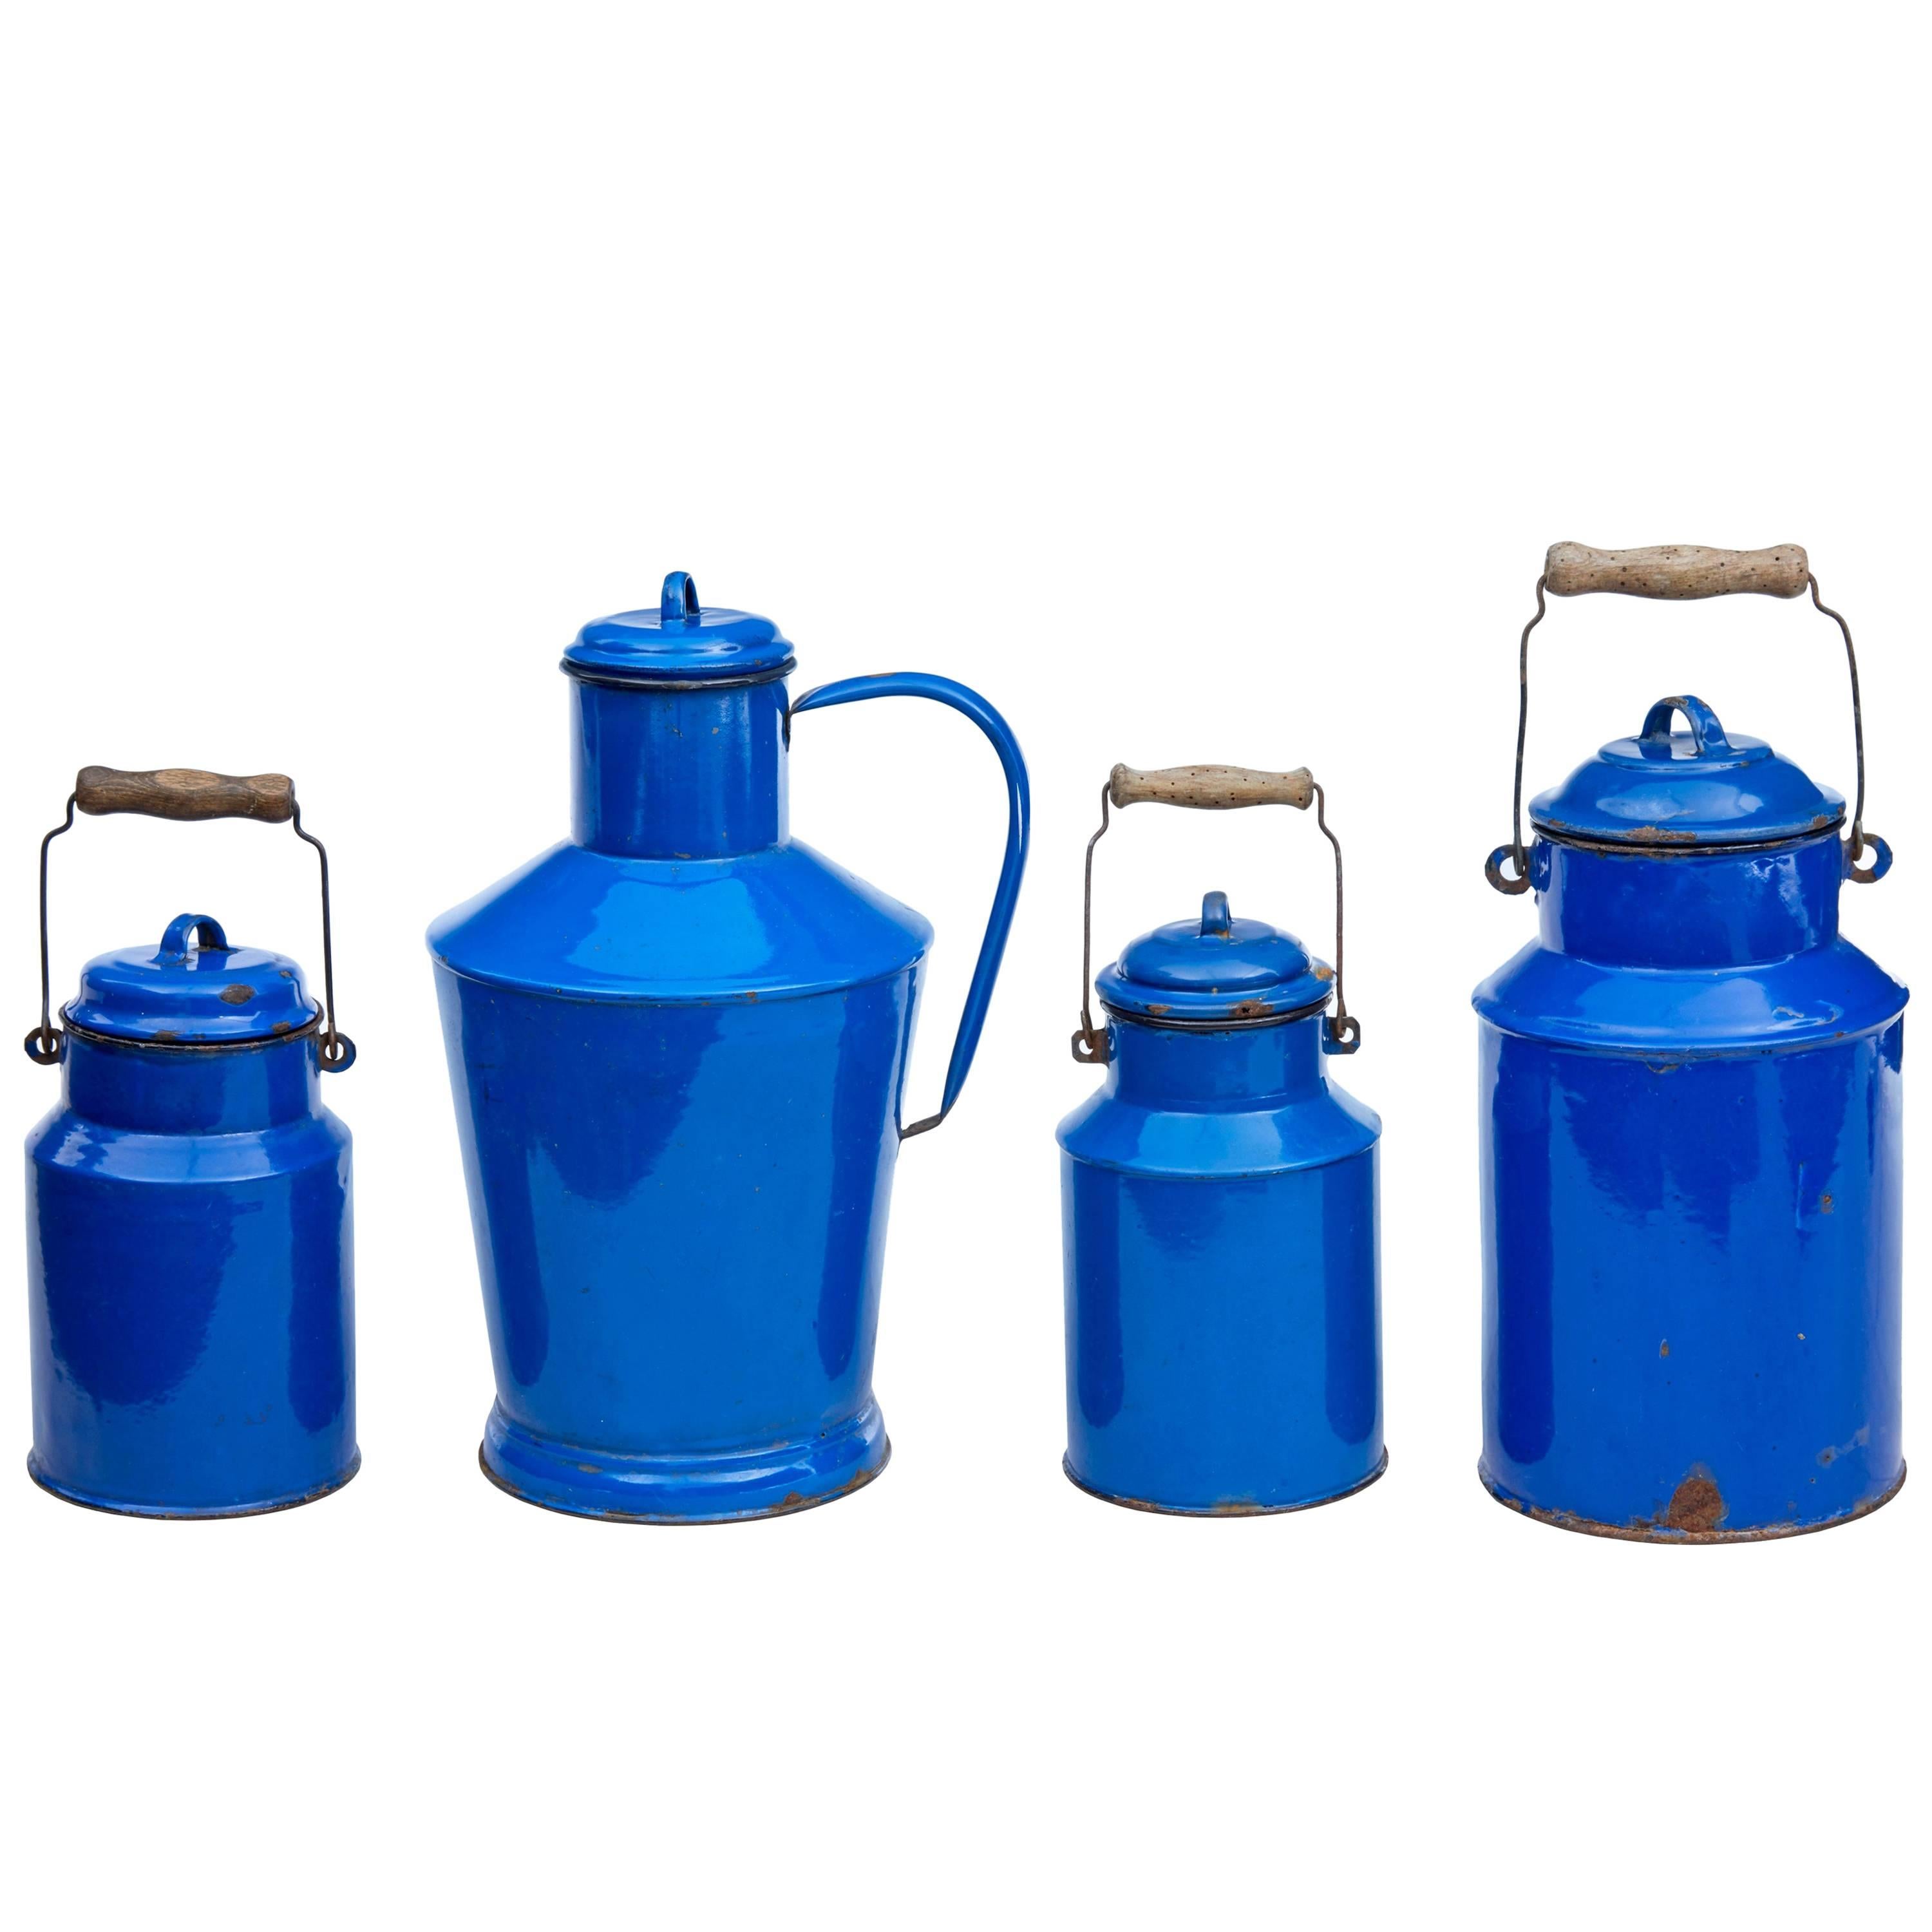 Collection of Four Pieces of Hungarian Enamelware by Bonyhad